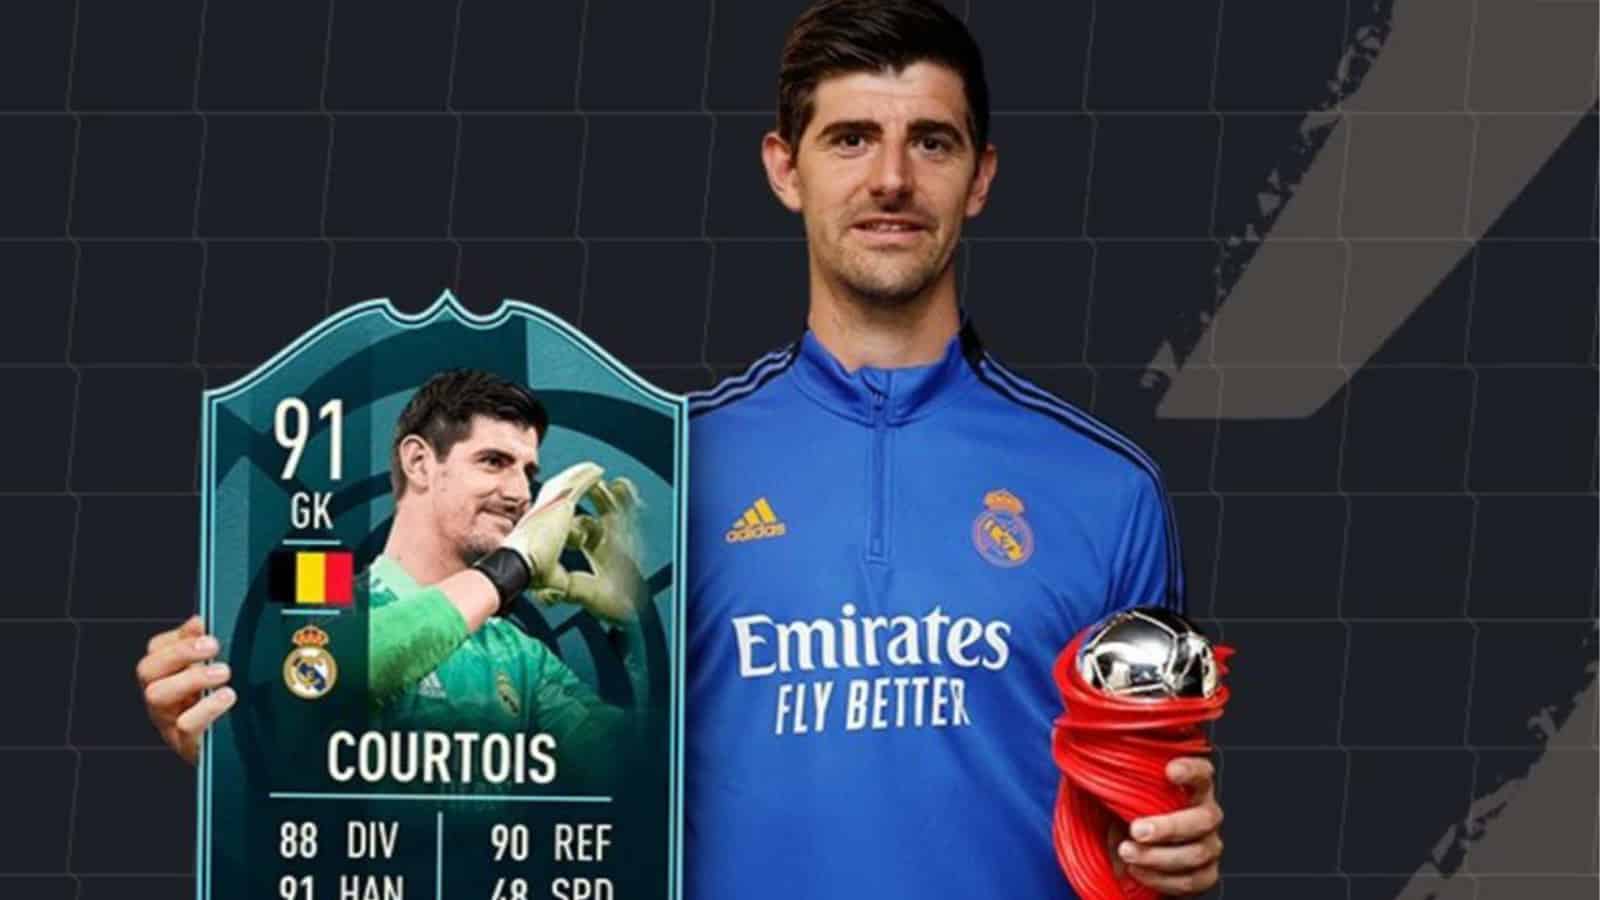 Real Madrid Courtois rifft Ea